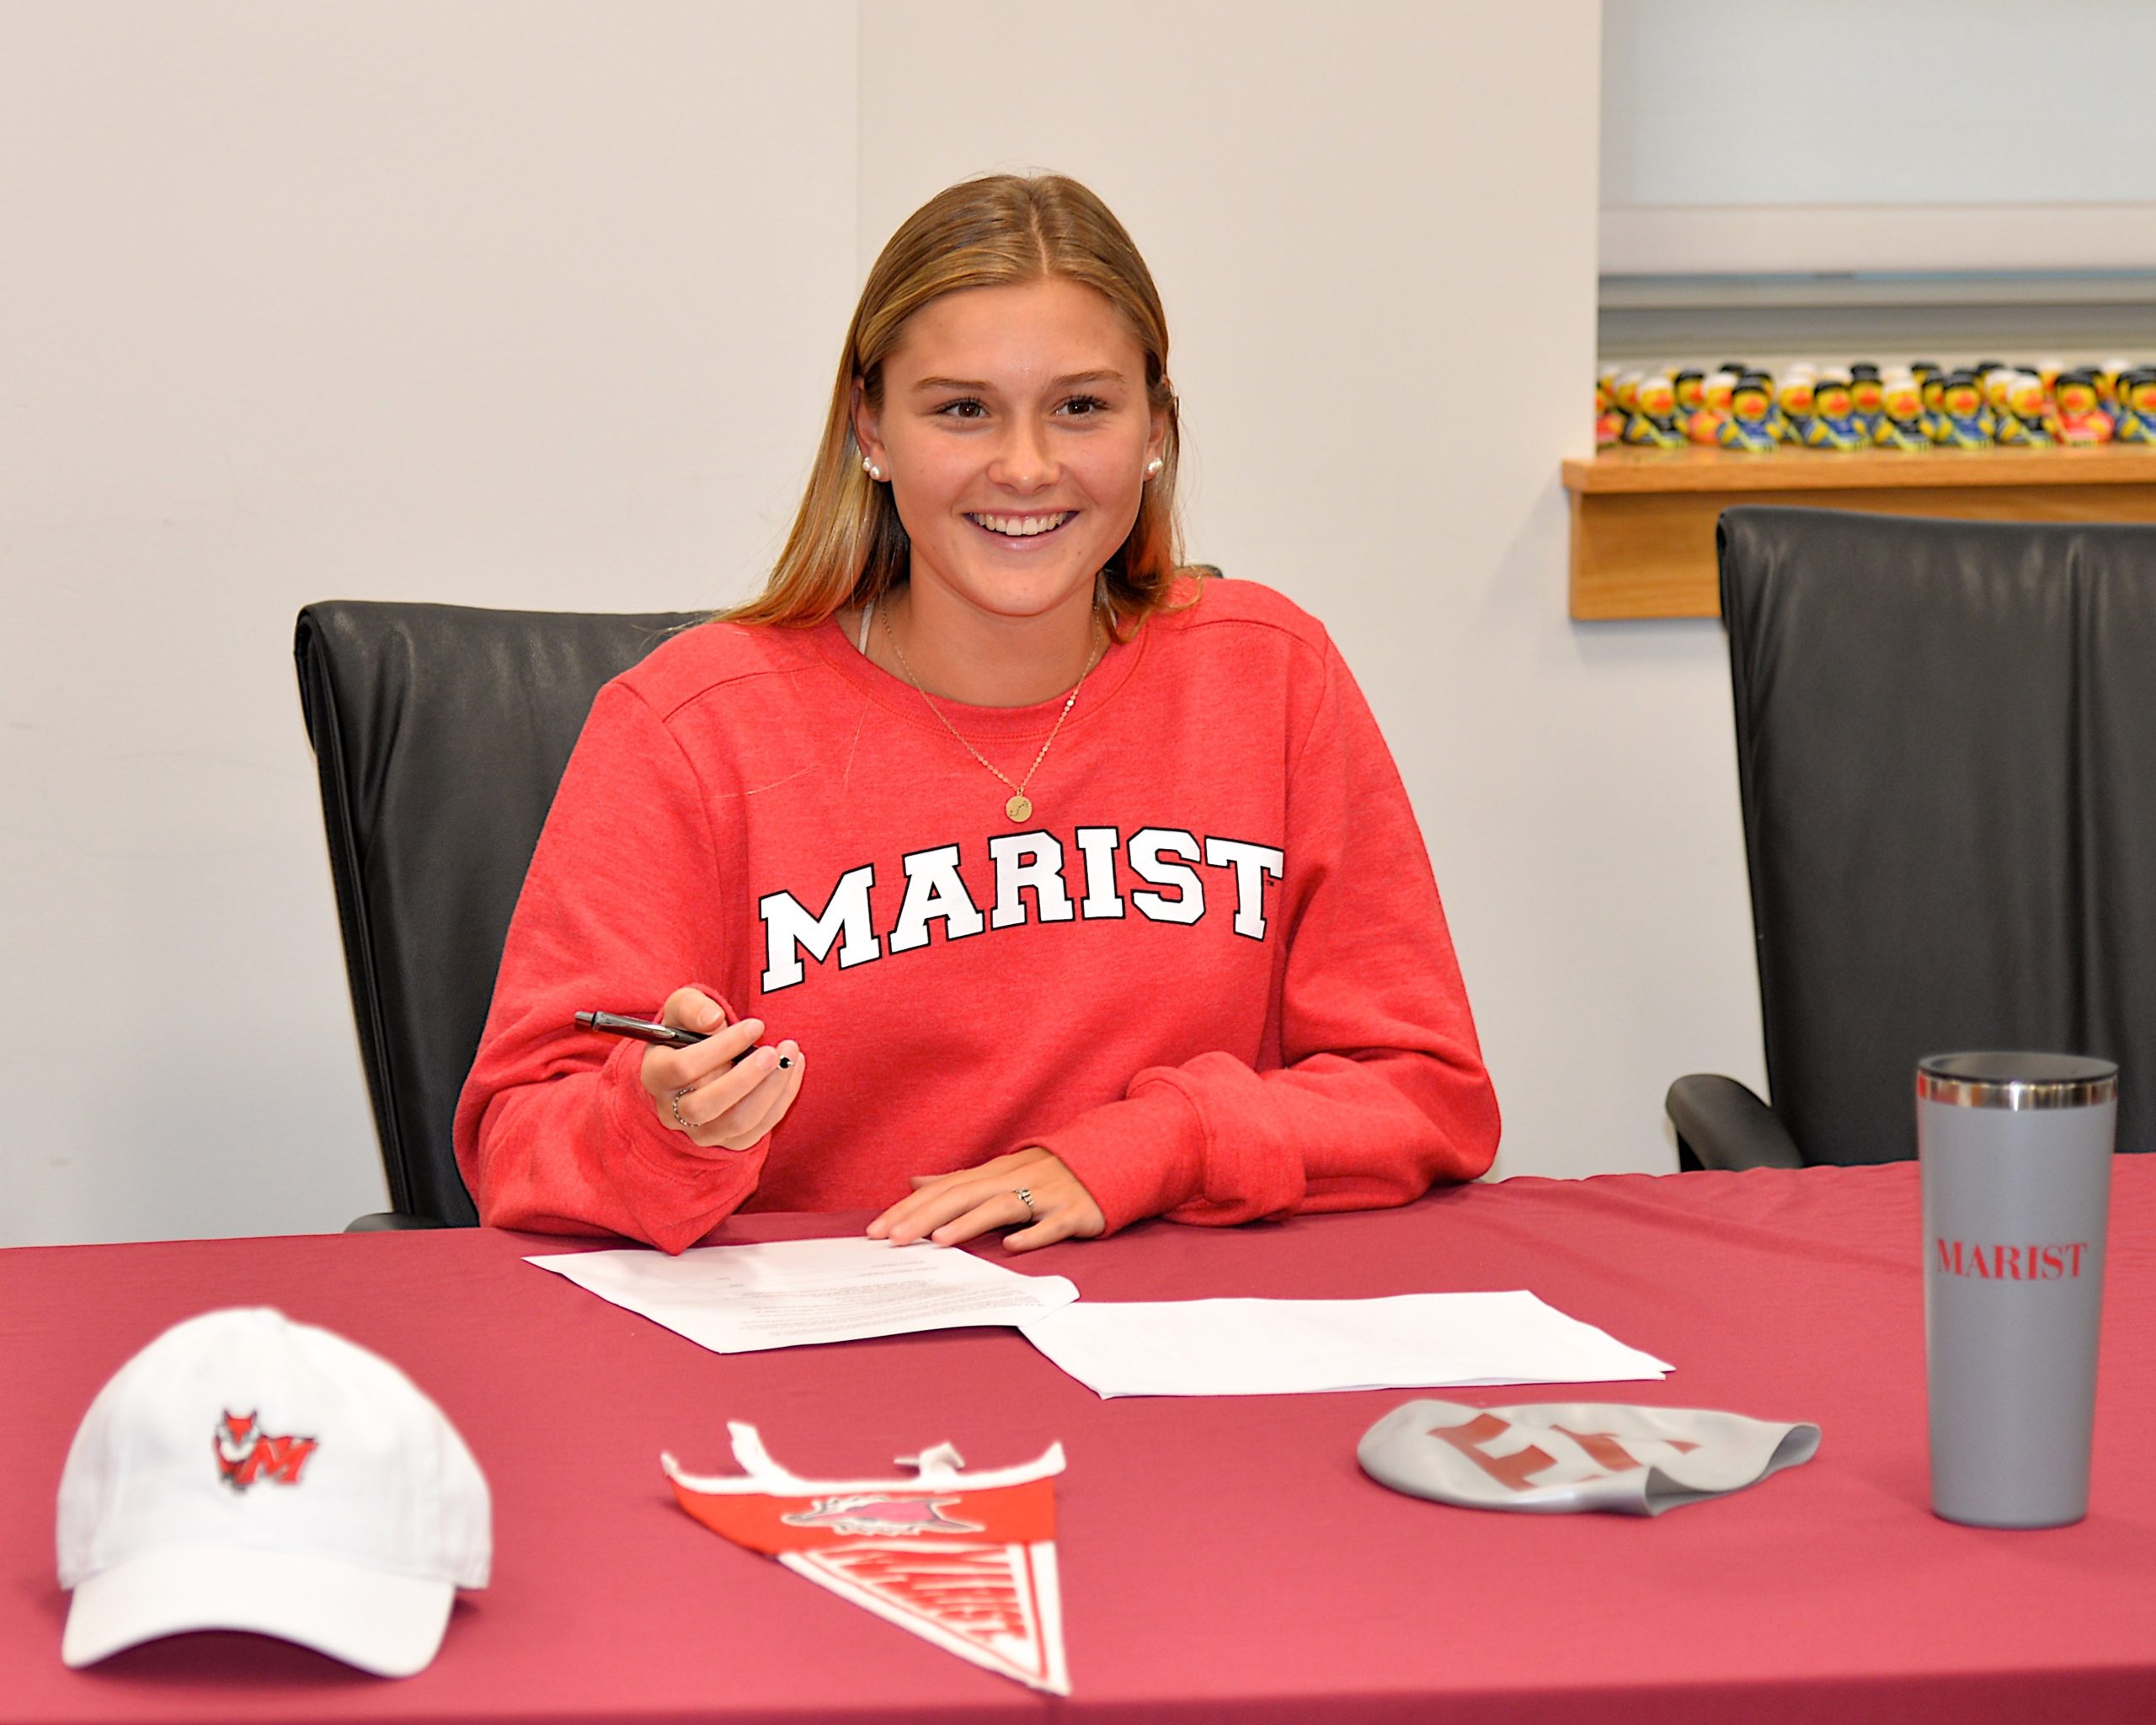 East Hampton senior Sophia Swanson made it official on Tuesday afternoon, committing to Marist College to continue her swim career.